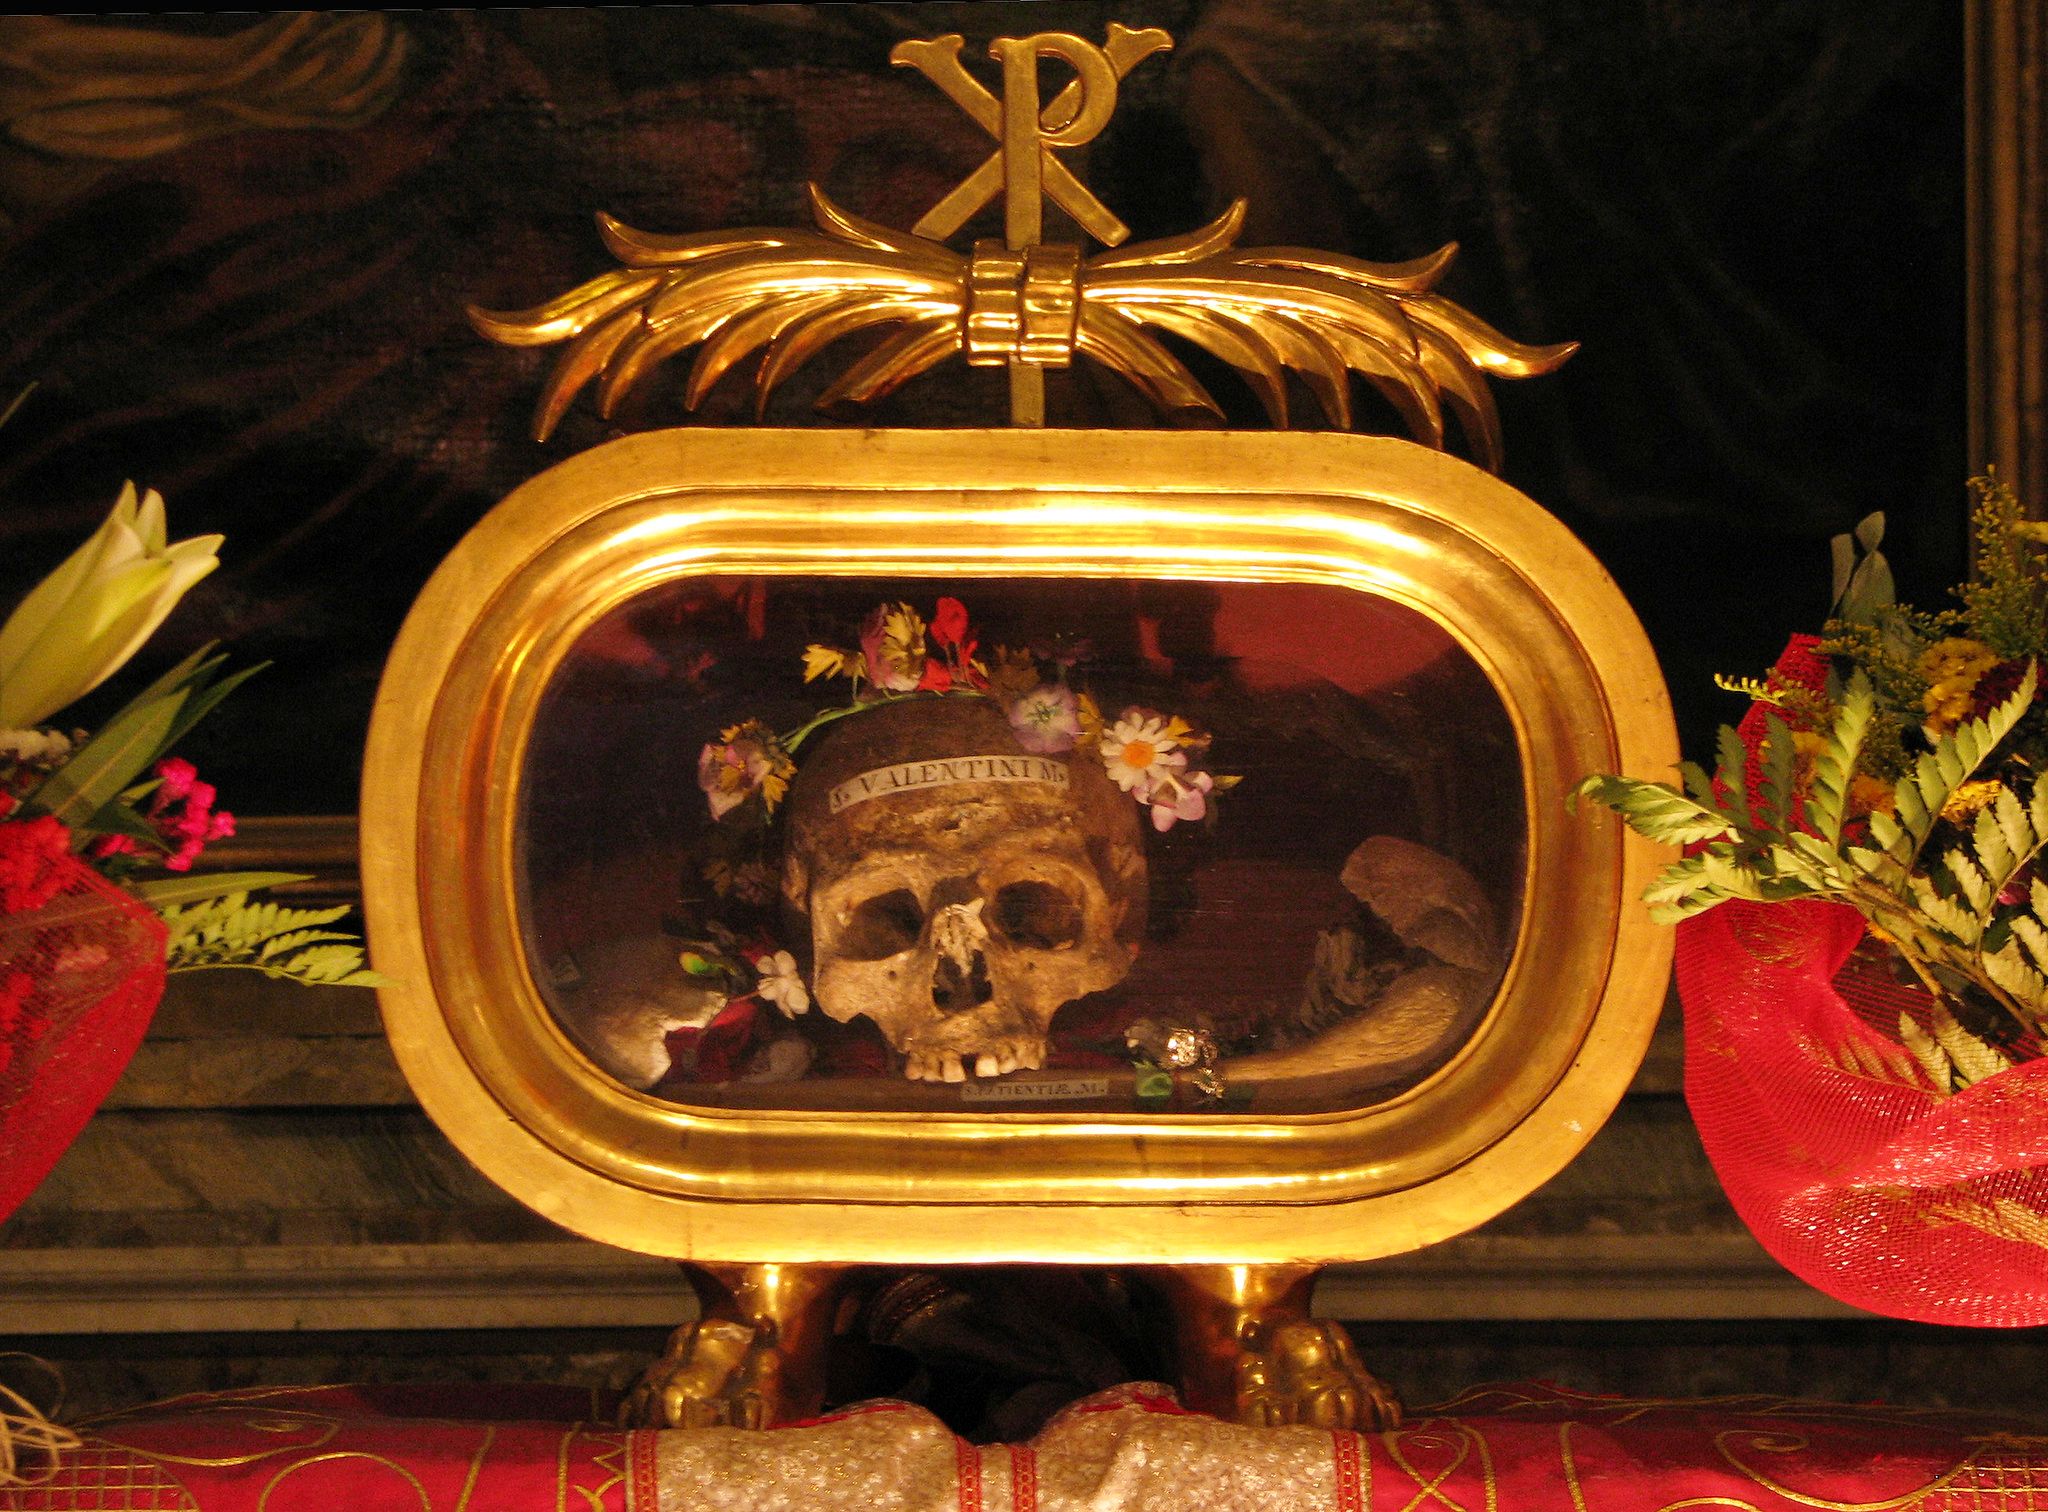 St. Valentine's mortal remains in Madrid, Spain